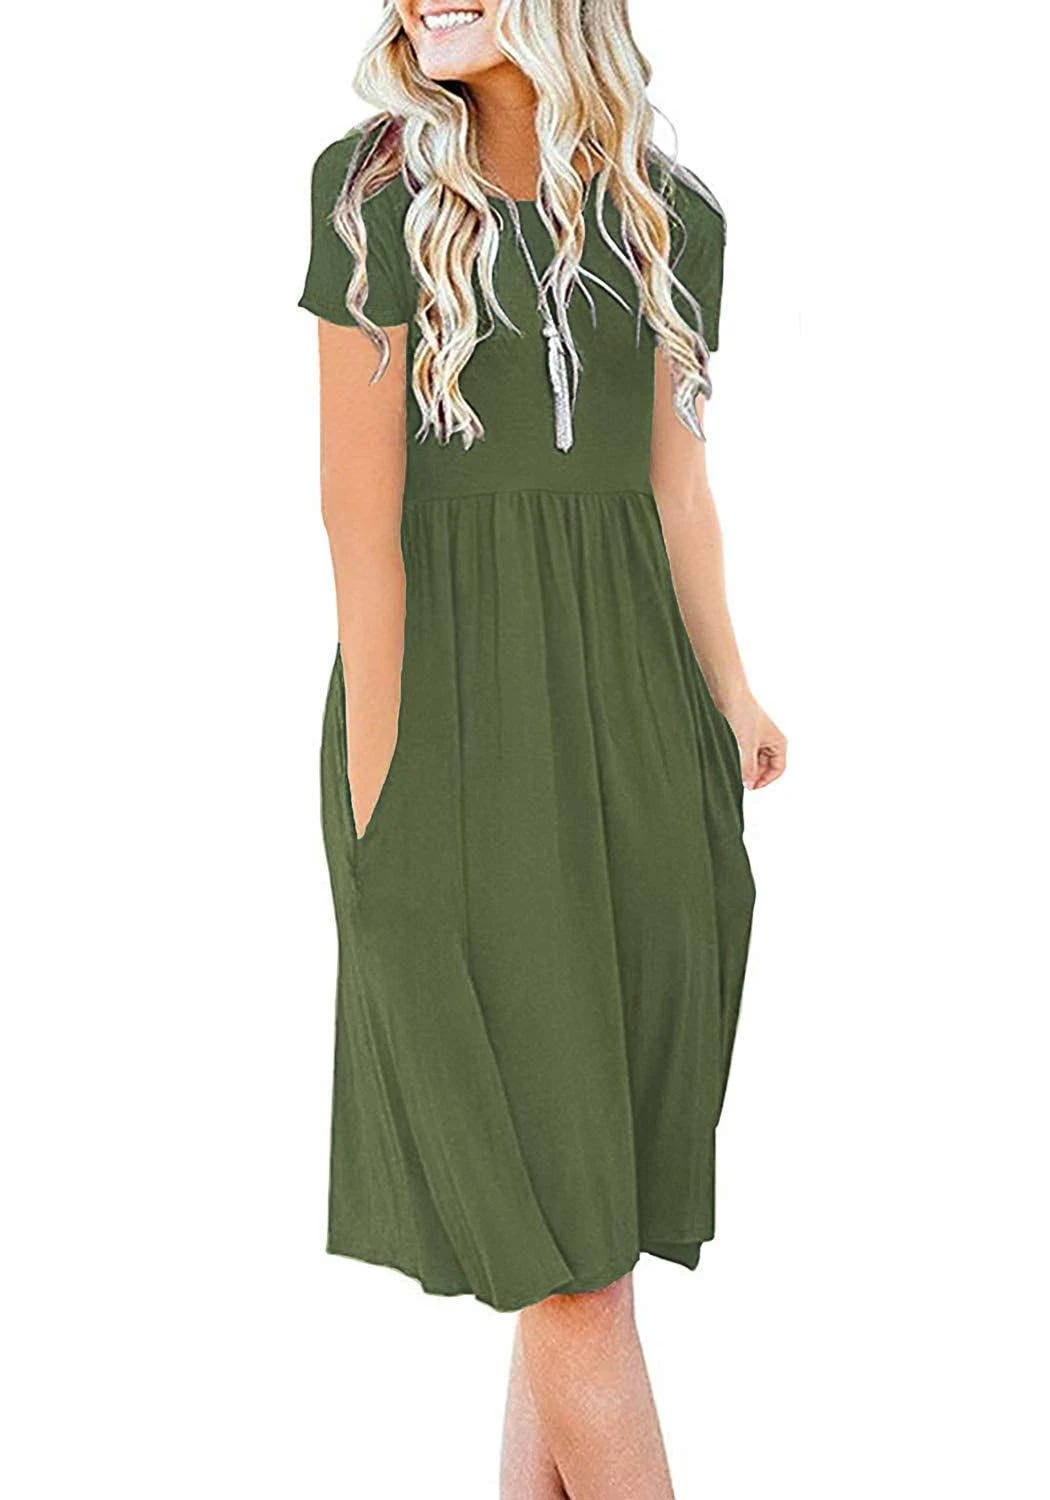 Chic Empire Waist Knee Length Dress in Army Green | Image